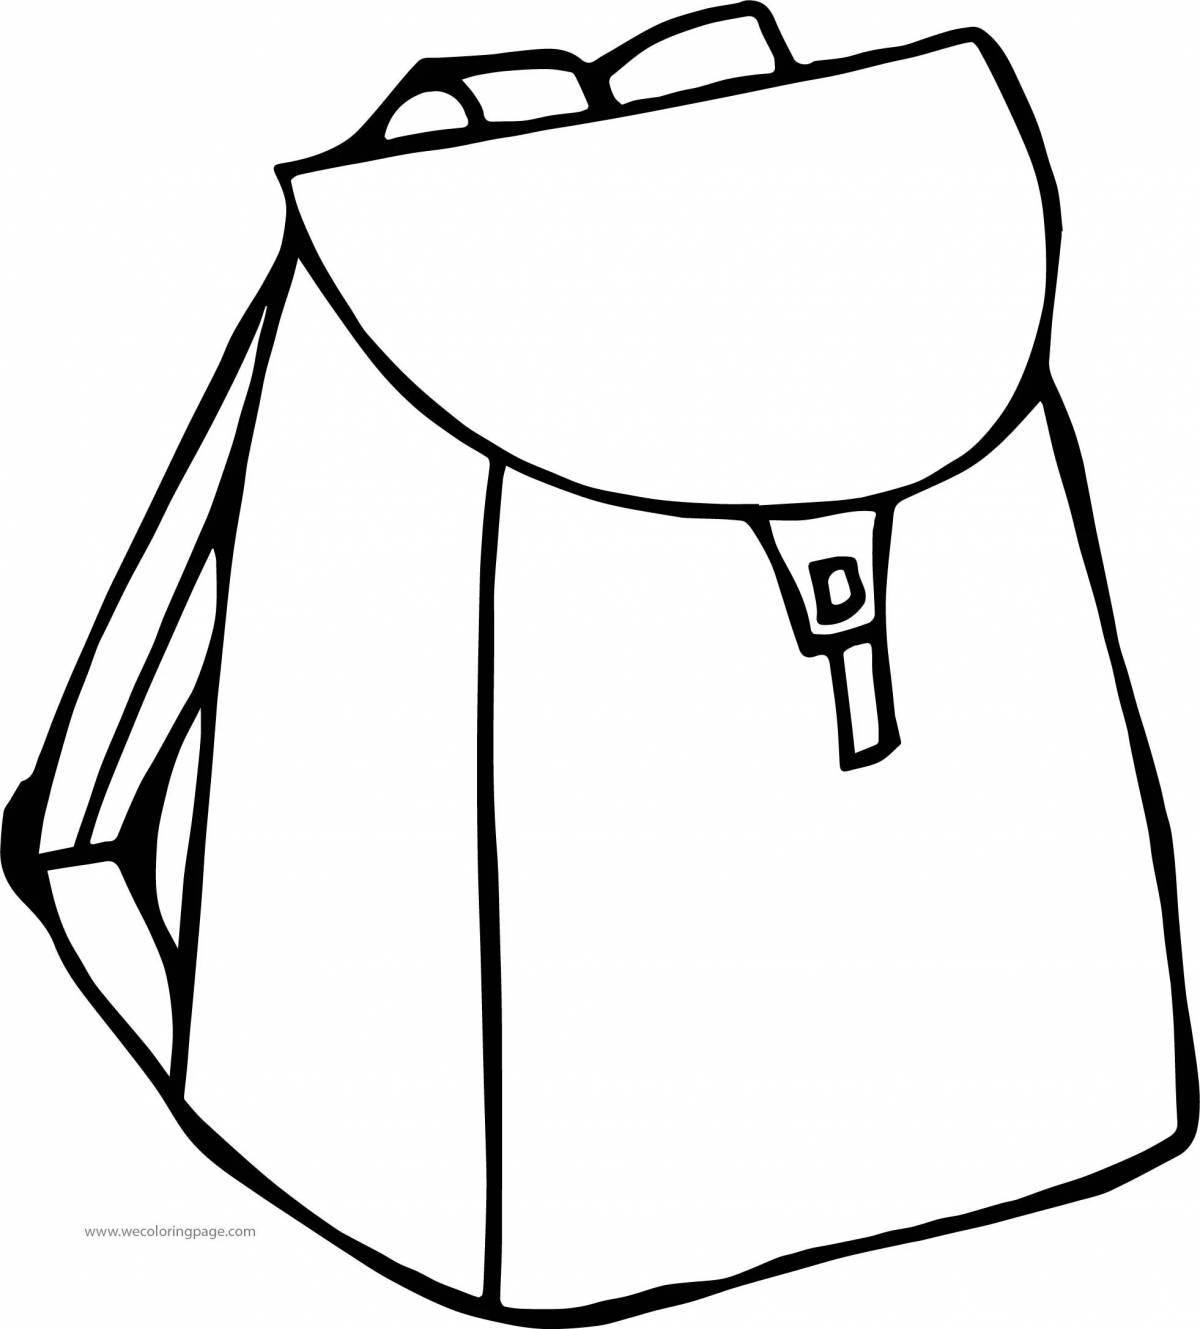 Incredible backpack coloring book for kids